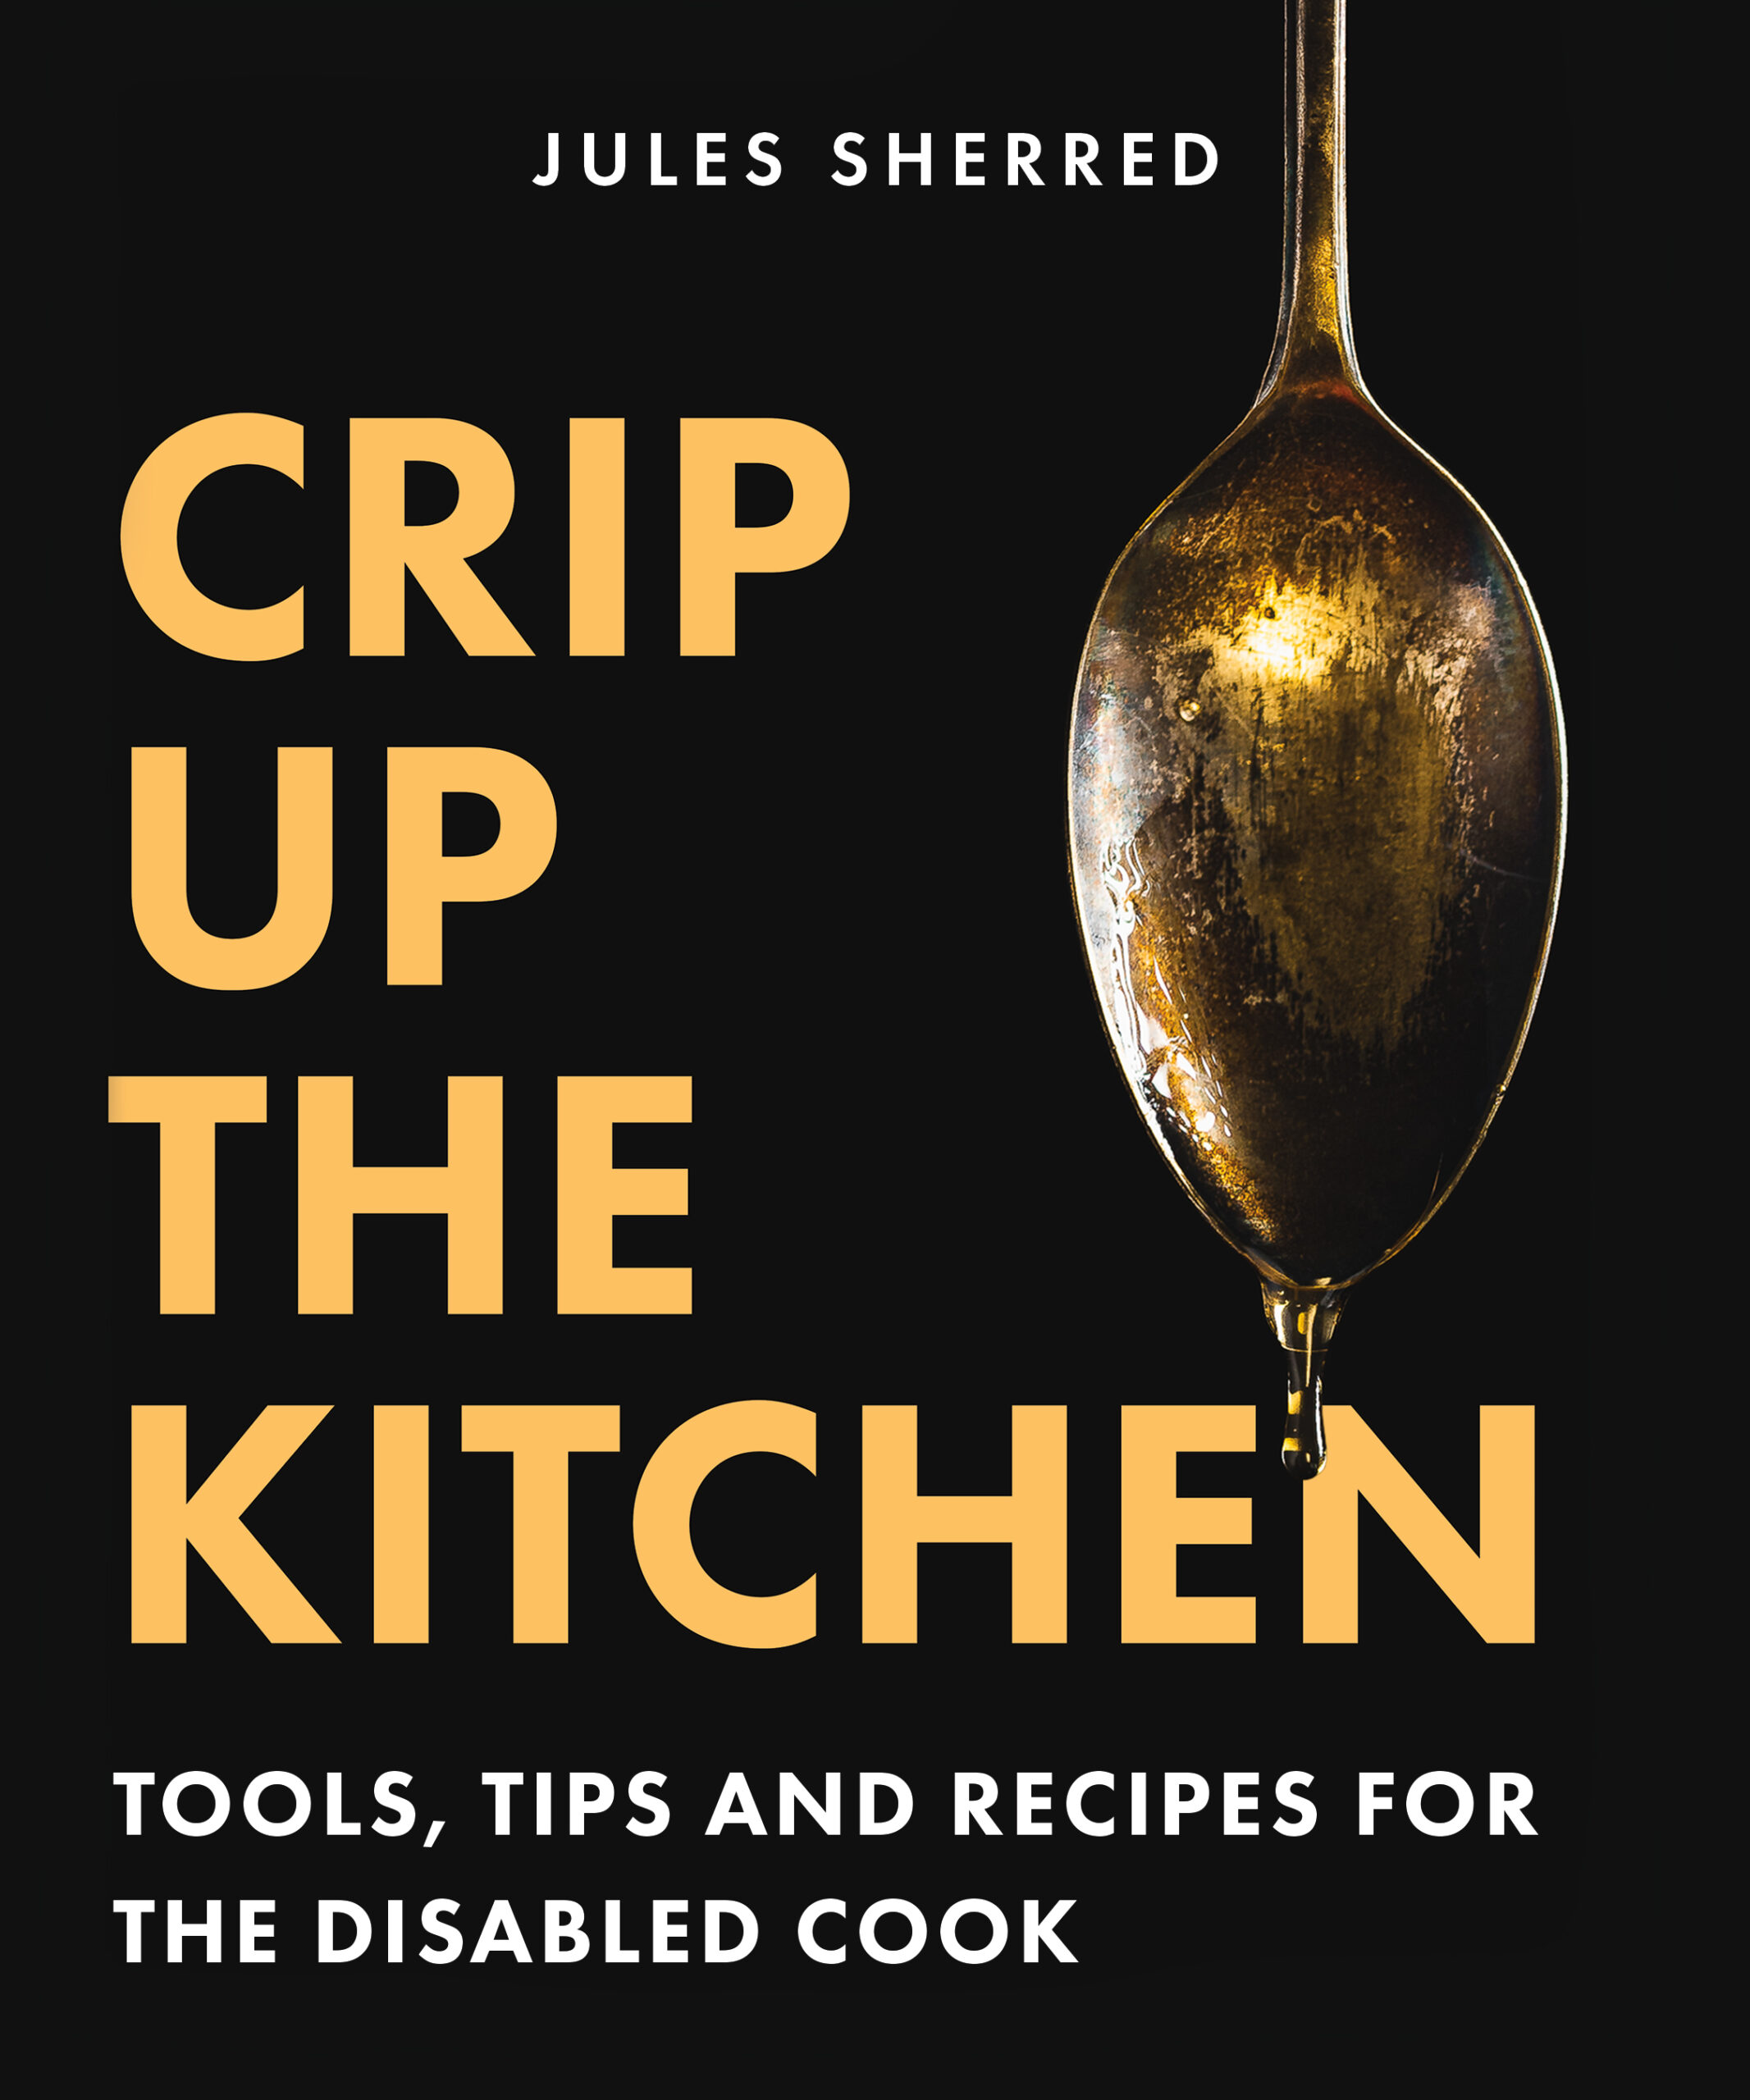 A black cover with white text across that top that reads "Jules Sherred." Down the left in big yellow text, one word per line, "CRIP UP THE KTICHEN". Across the buttom in white reads, "TOOLS, TIPS AND RECIPES FOR THE DISABLED COOK." On the right side of the cover is a vertical spoon with a drip of honey.